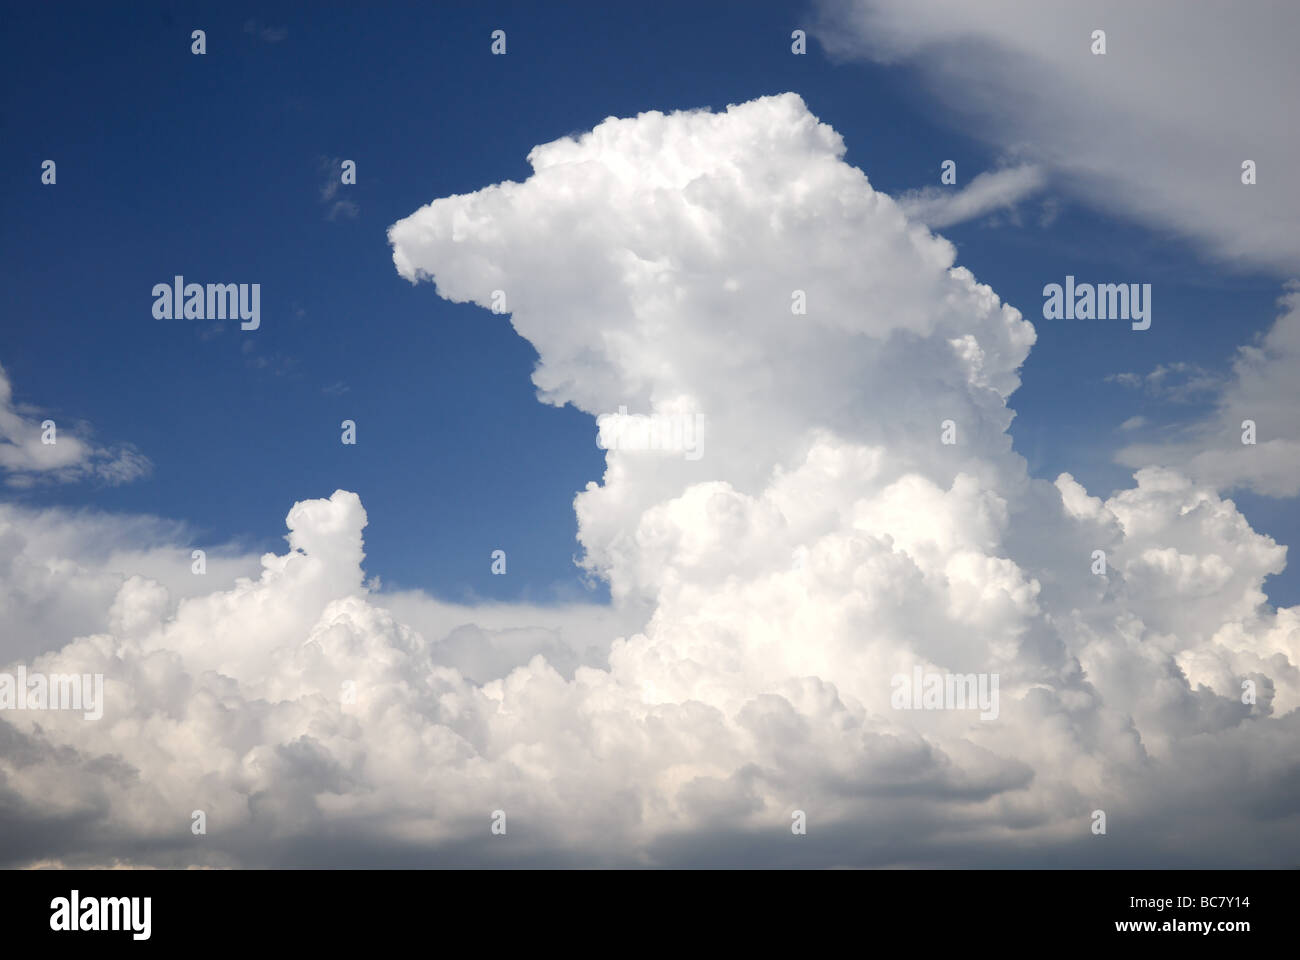 Storm clouds forming Stock Photo